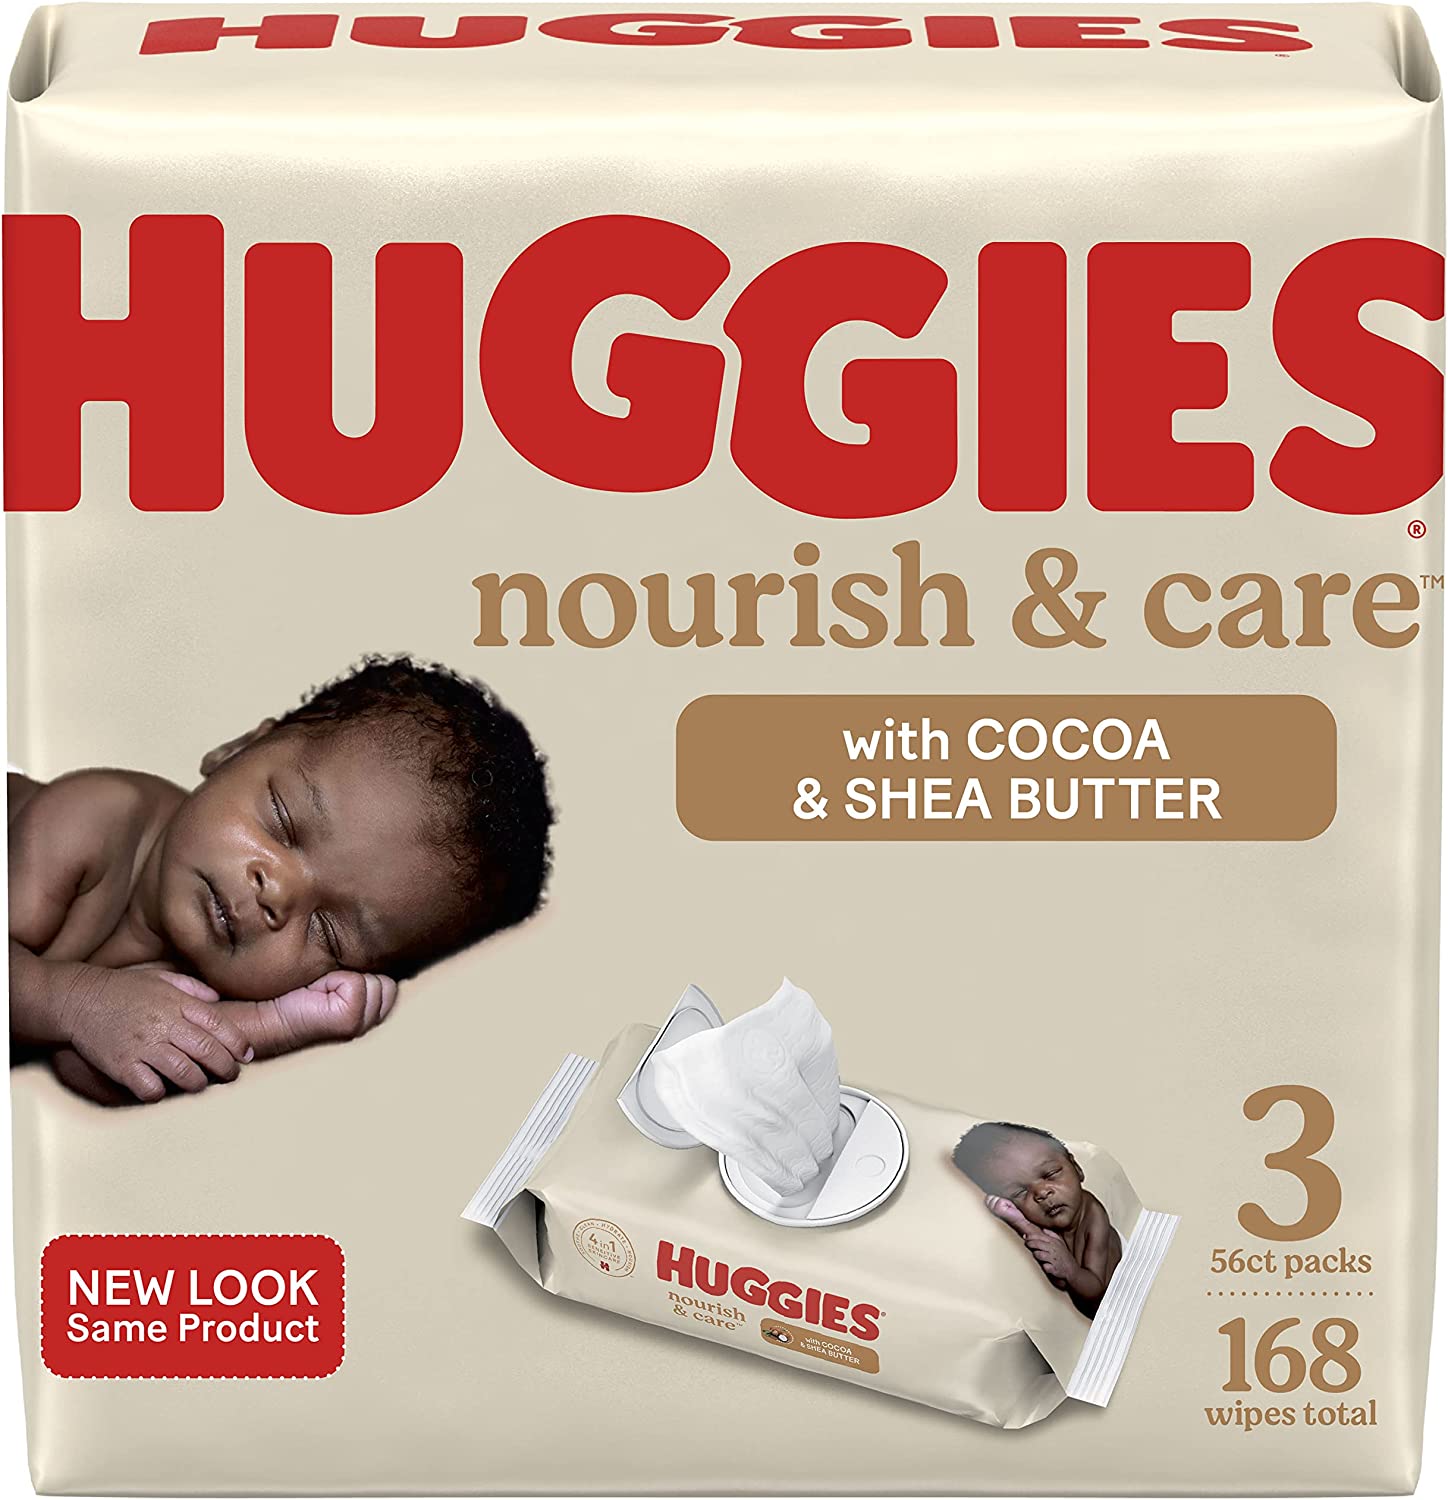 Huggies Nourish & Care Scented Baby Wipes, 3 Pack, 168 Total Ct (Select for More Options) - image 1 of 11